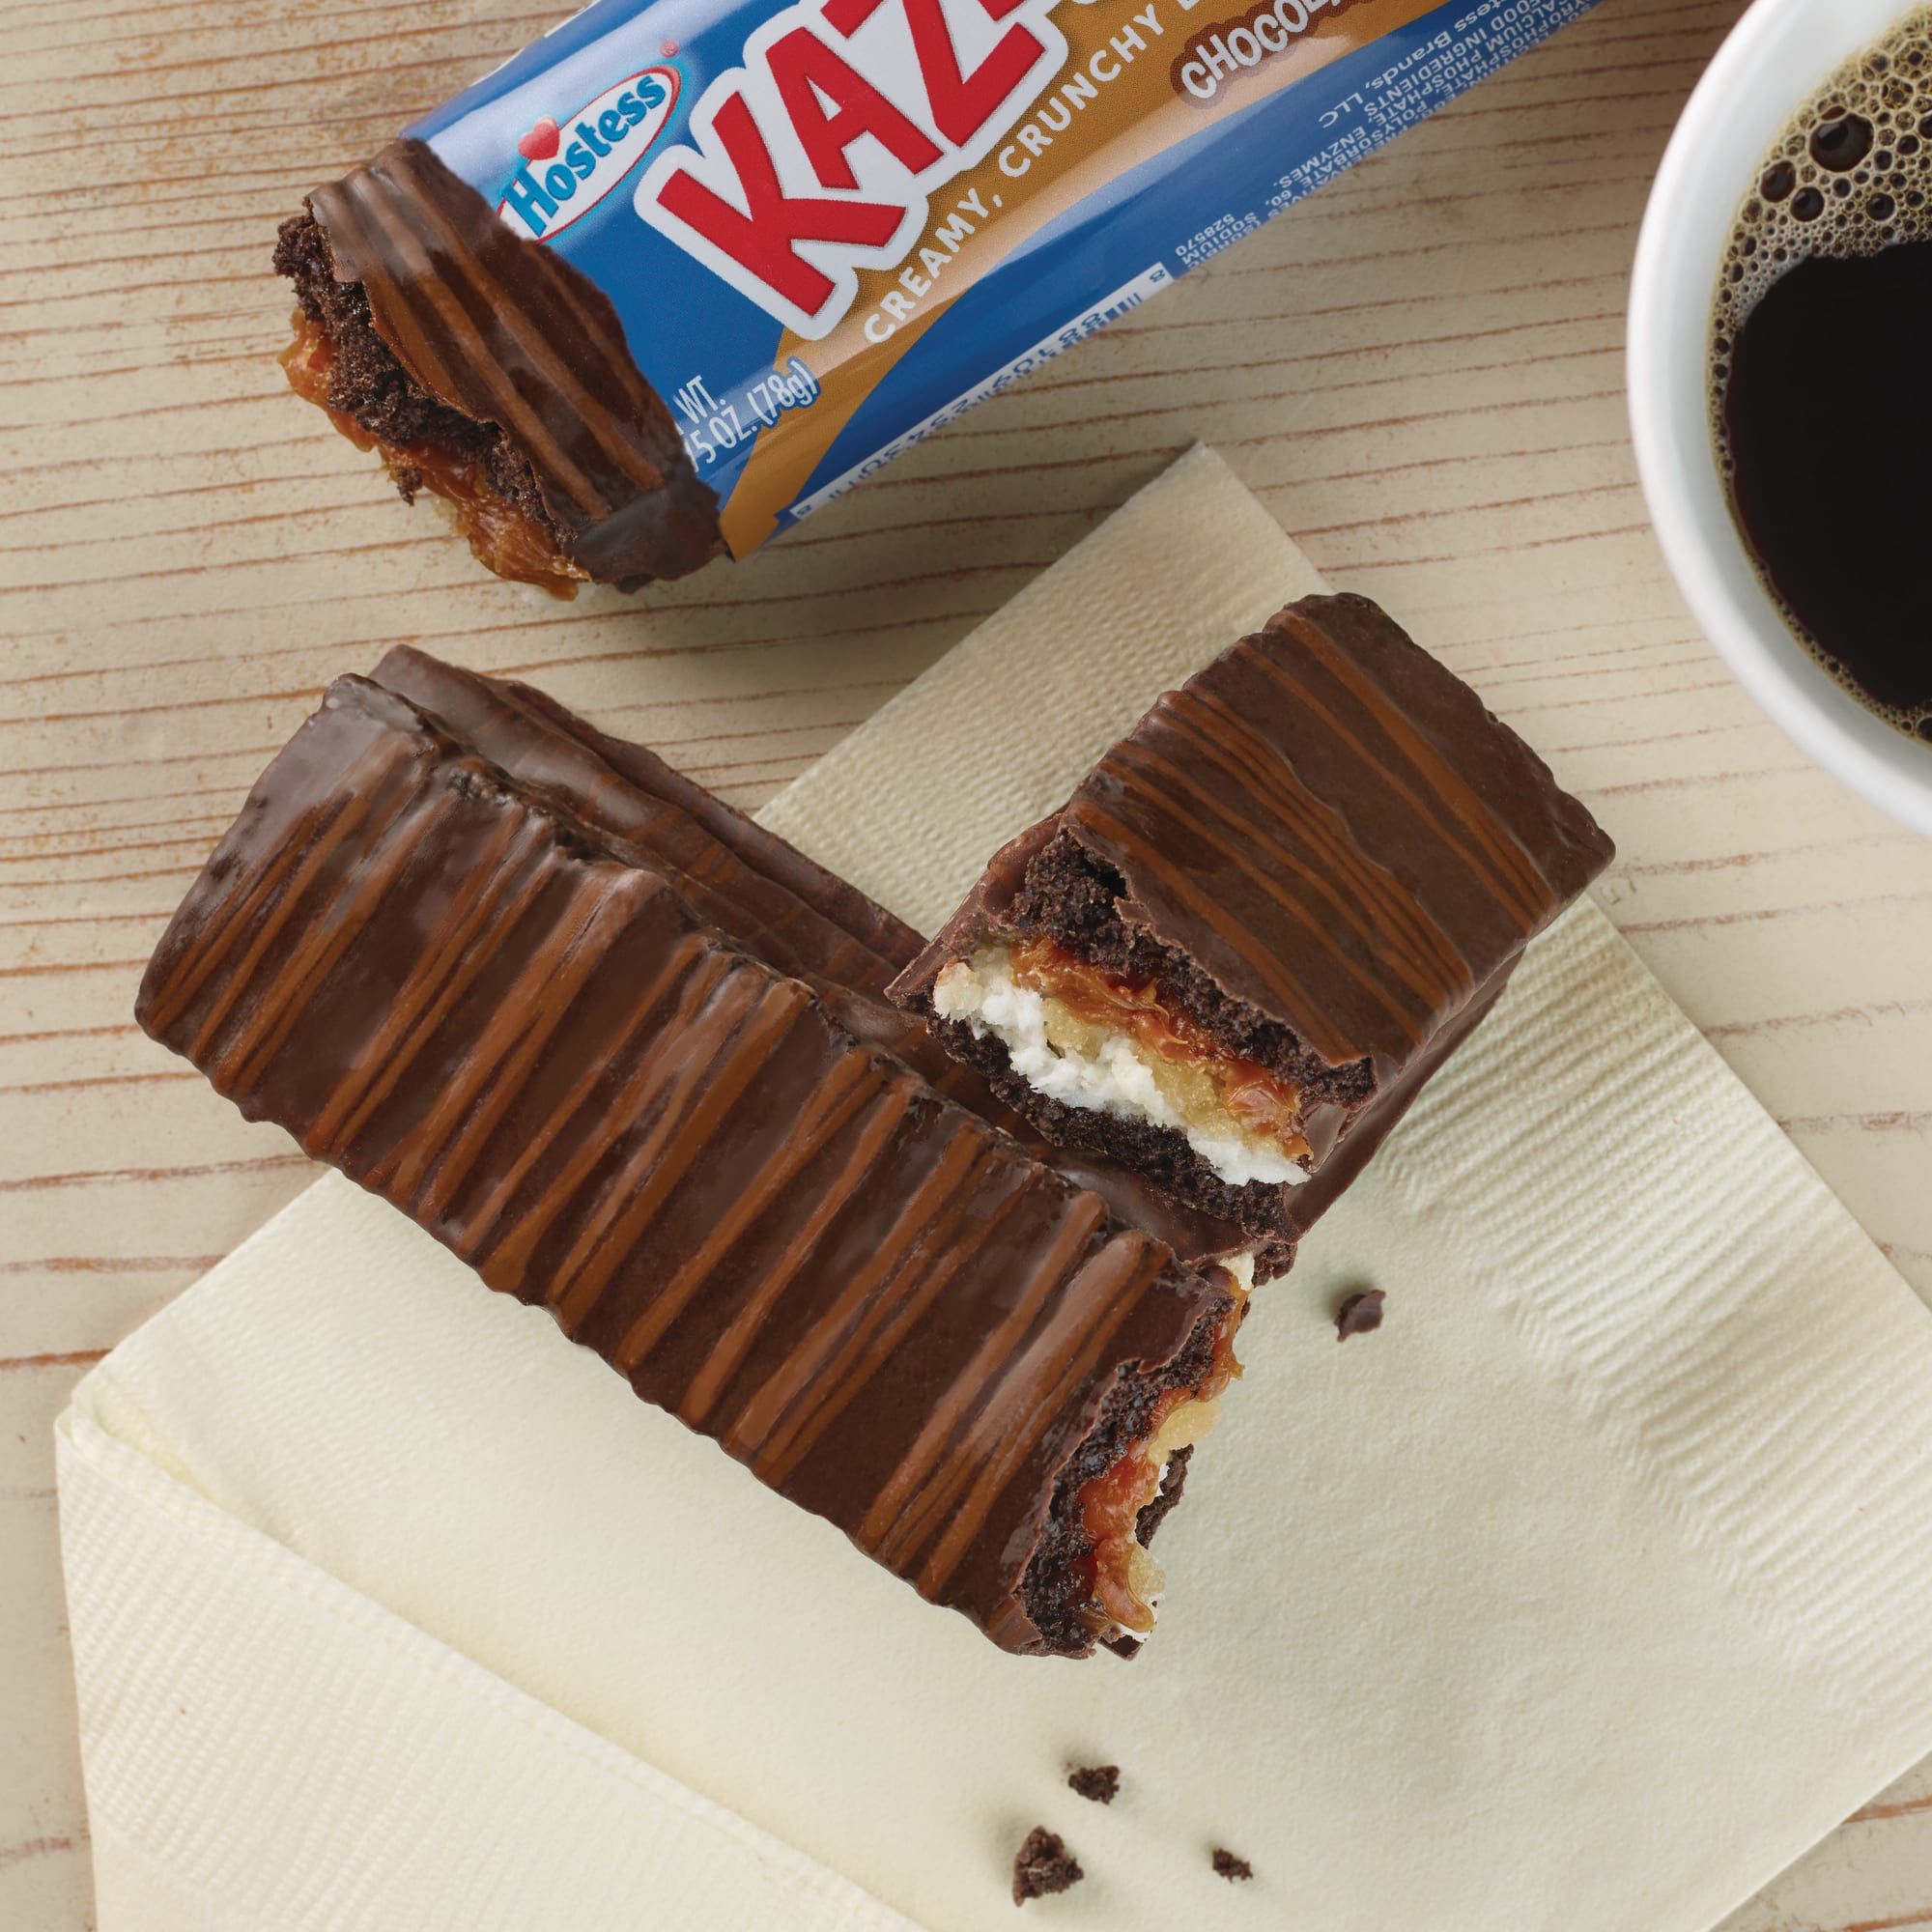 Hostess Kazbars are the ultimate creamy, crunchy snacking experience